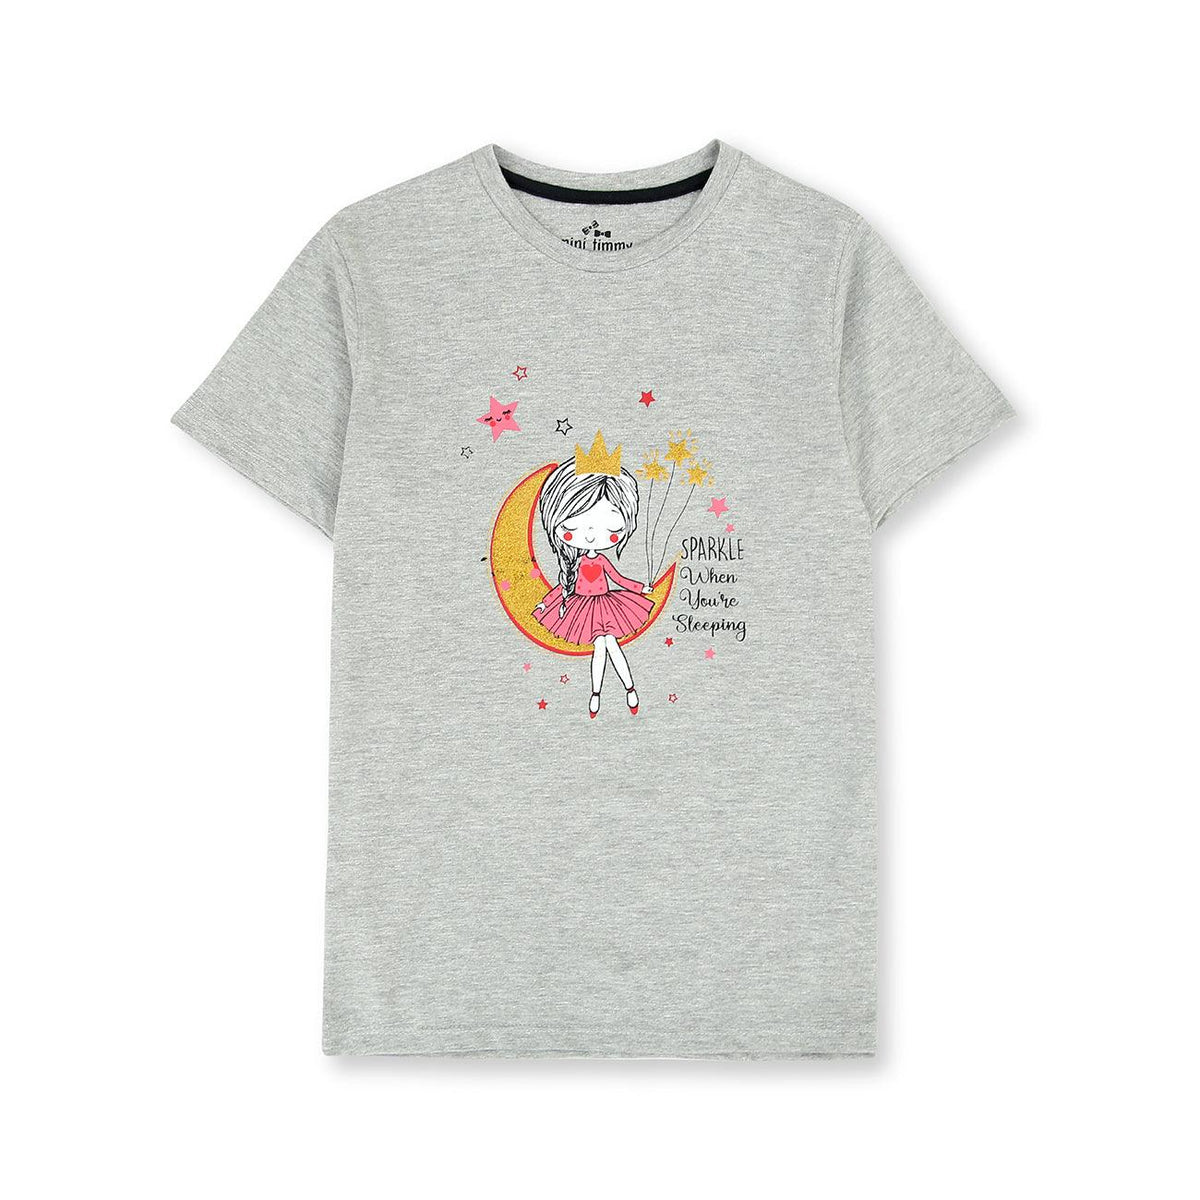 Exclusive Printed Soft Cotton Gray T-Shirt For Girls 9 MONTH - 10 YRS (MI-10969) - Brands River